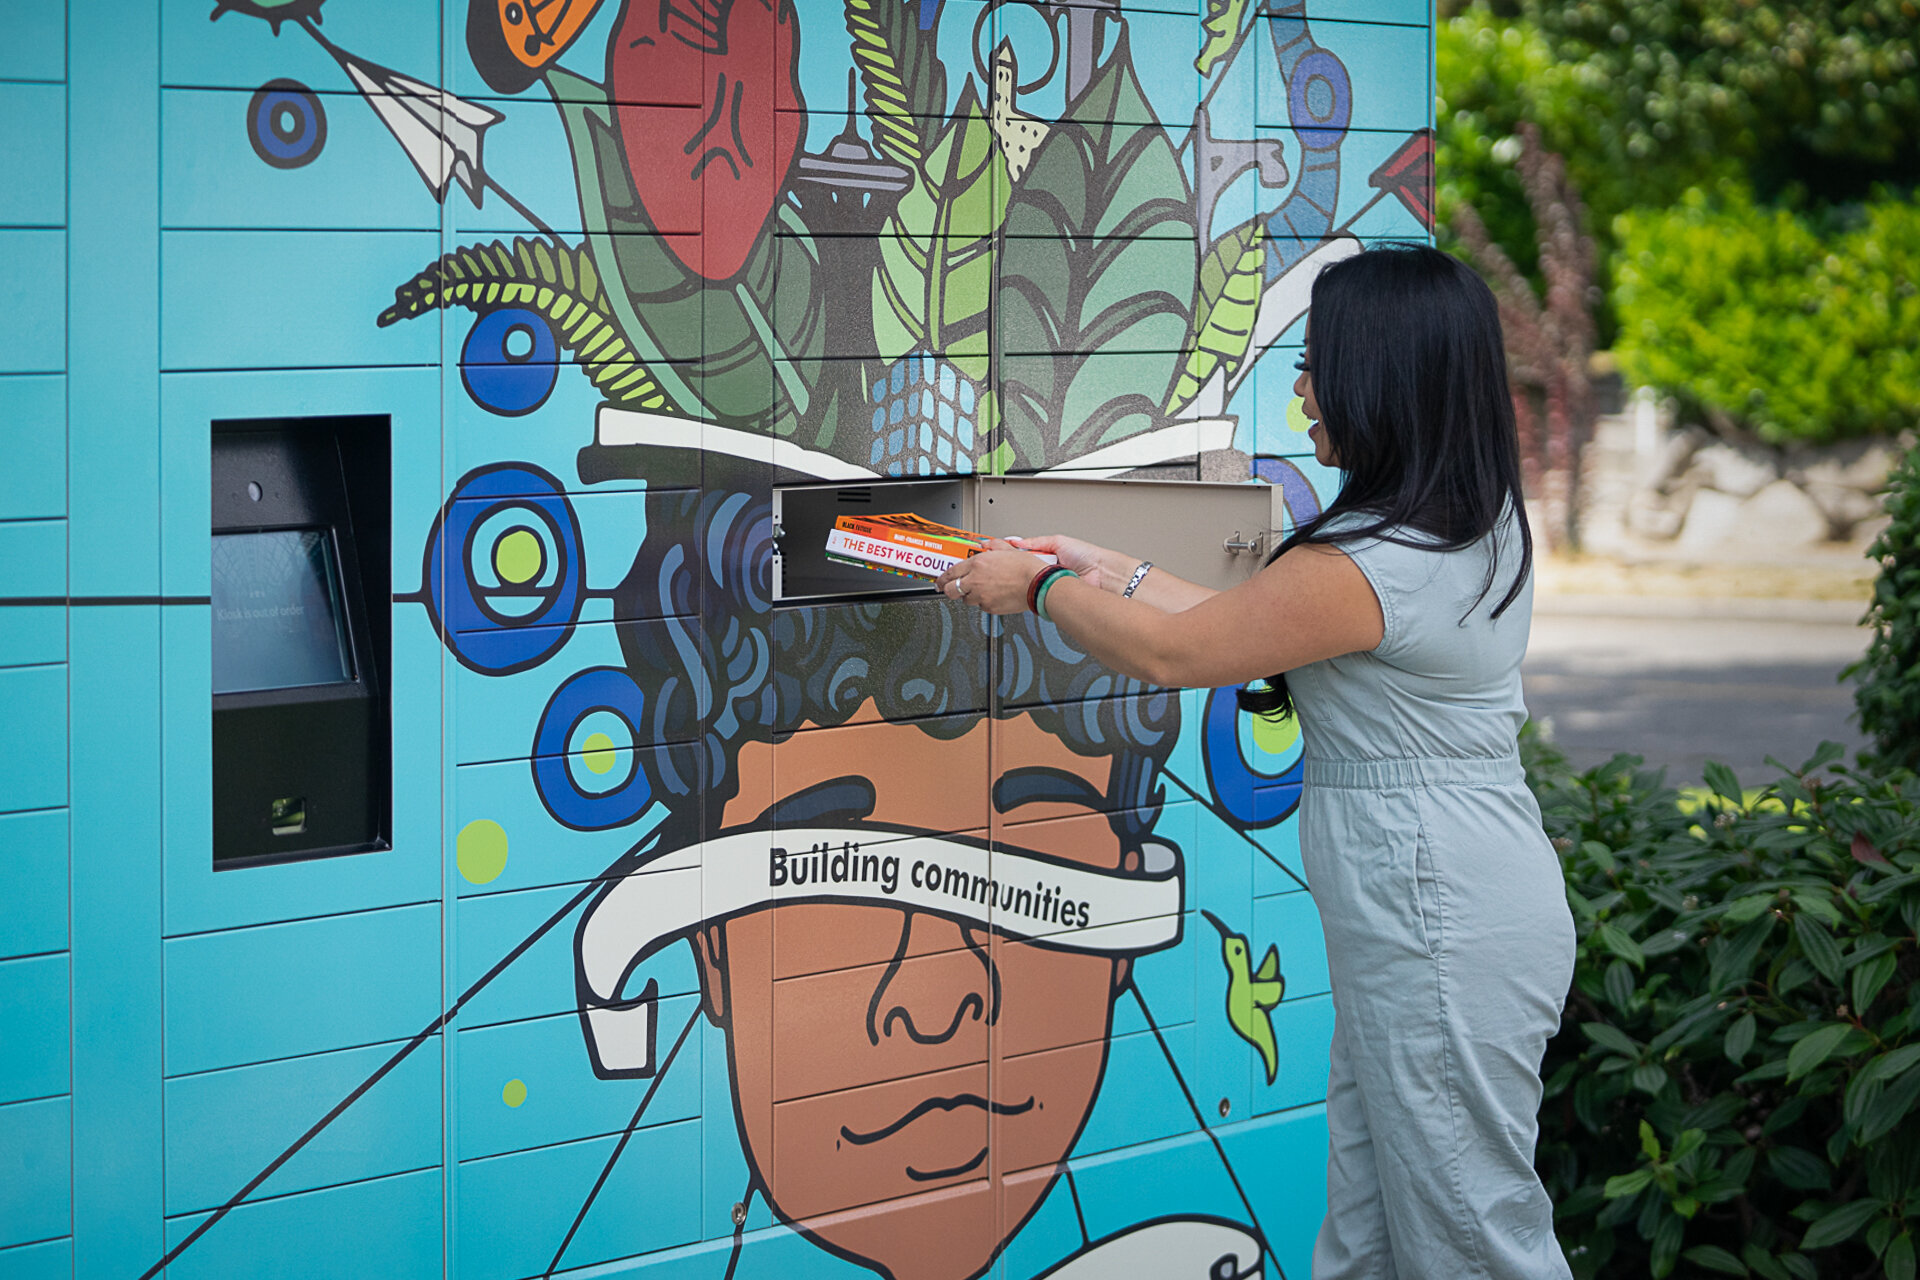  A Seattle library staff member demonstrates the new library locker system with art by local artist Carlos Martinez.  